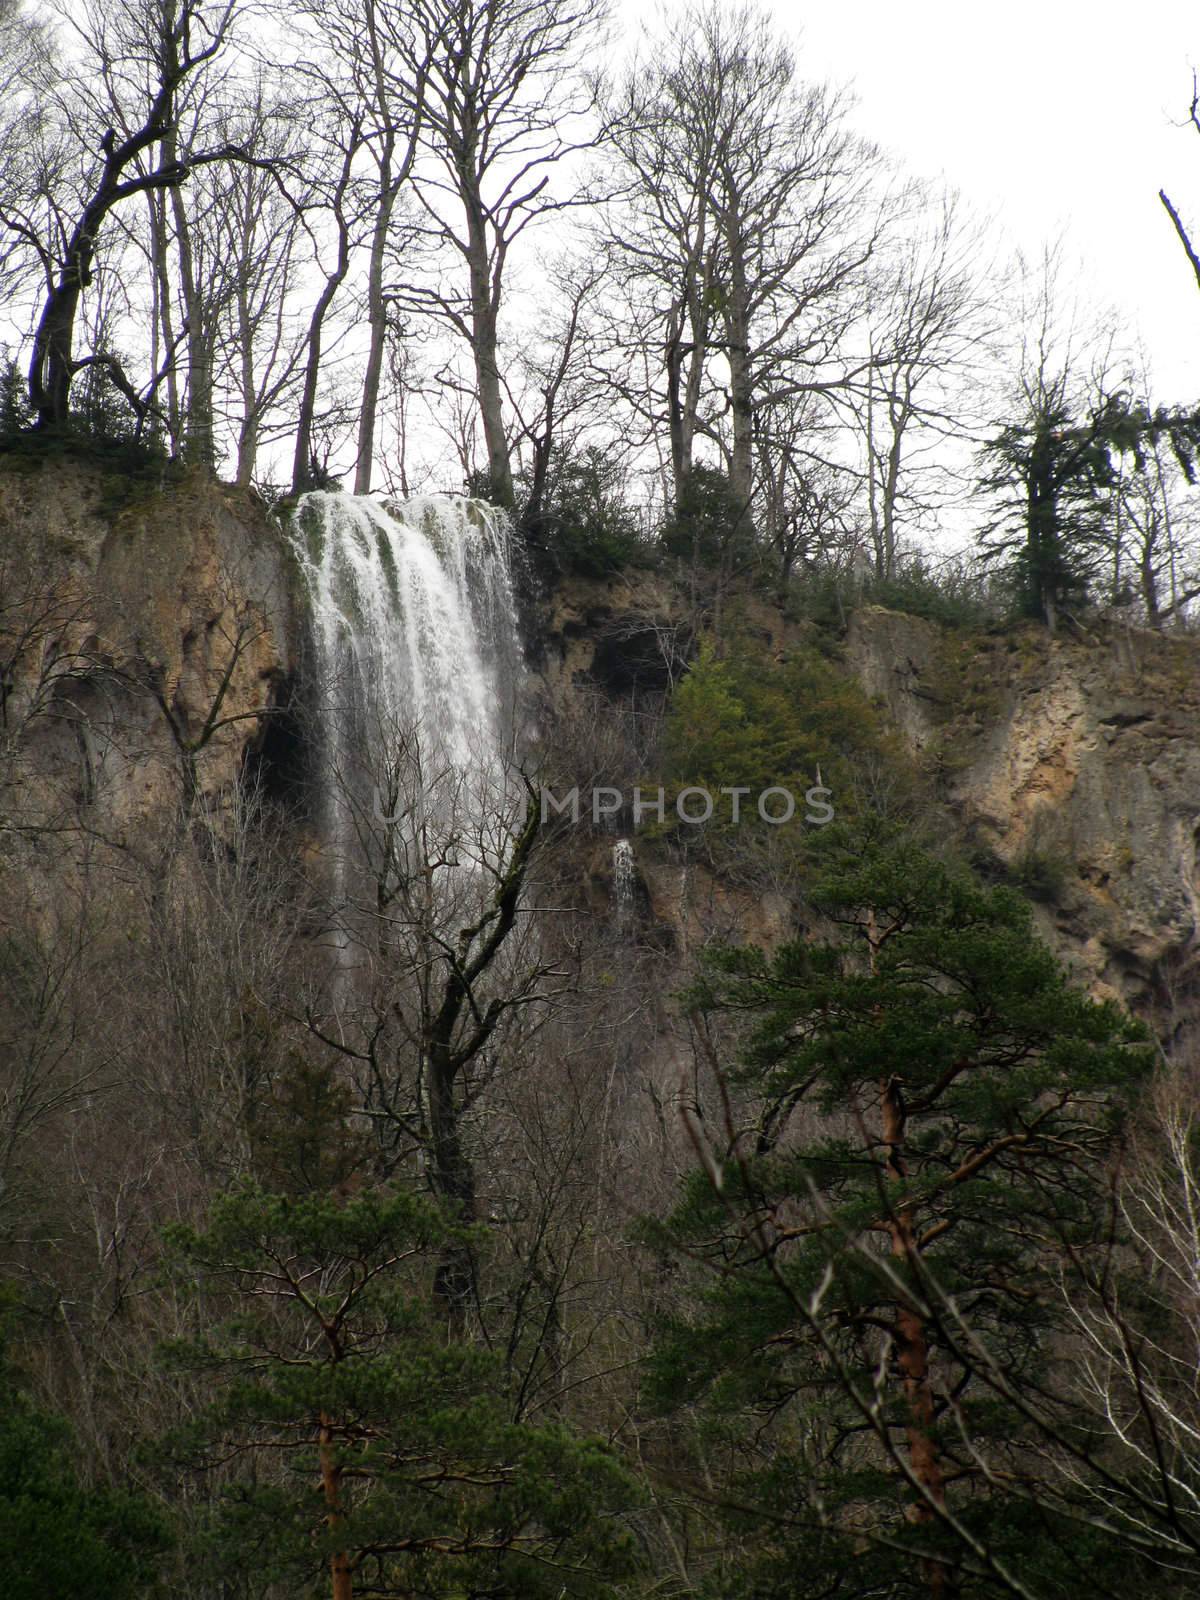 Europe, cascade, trip, tour natural monument, sightseeing object flora